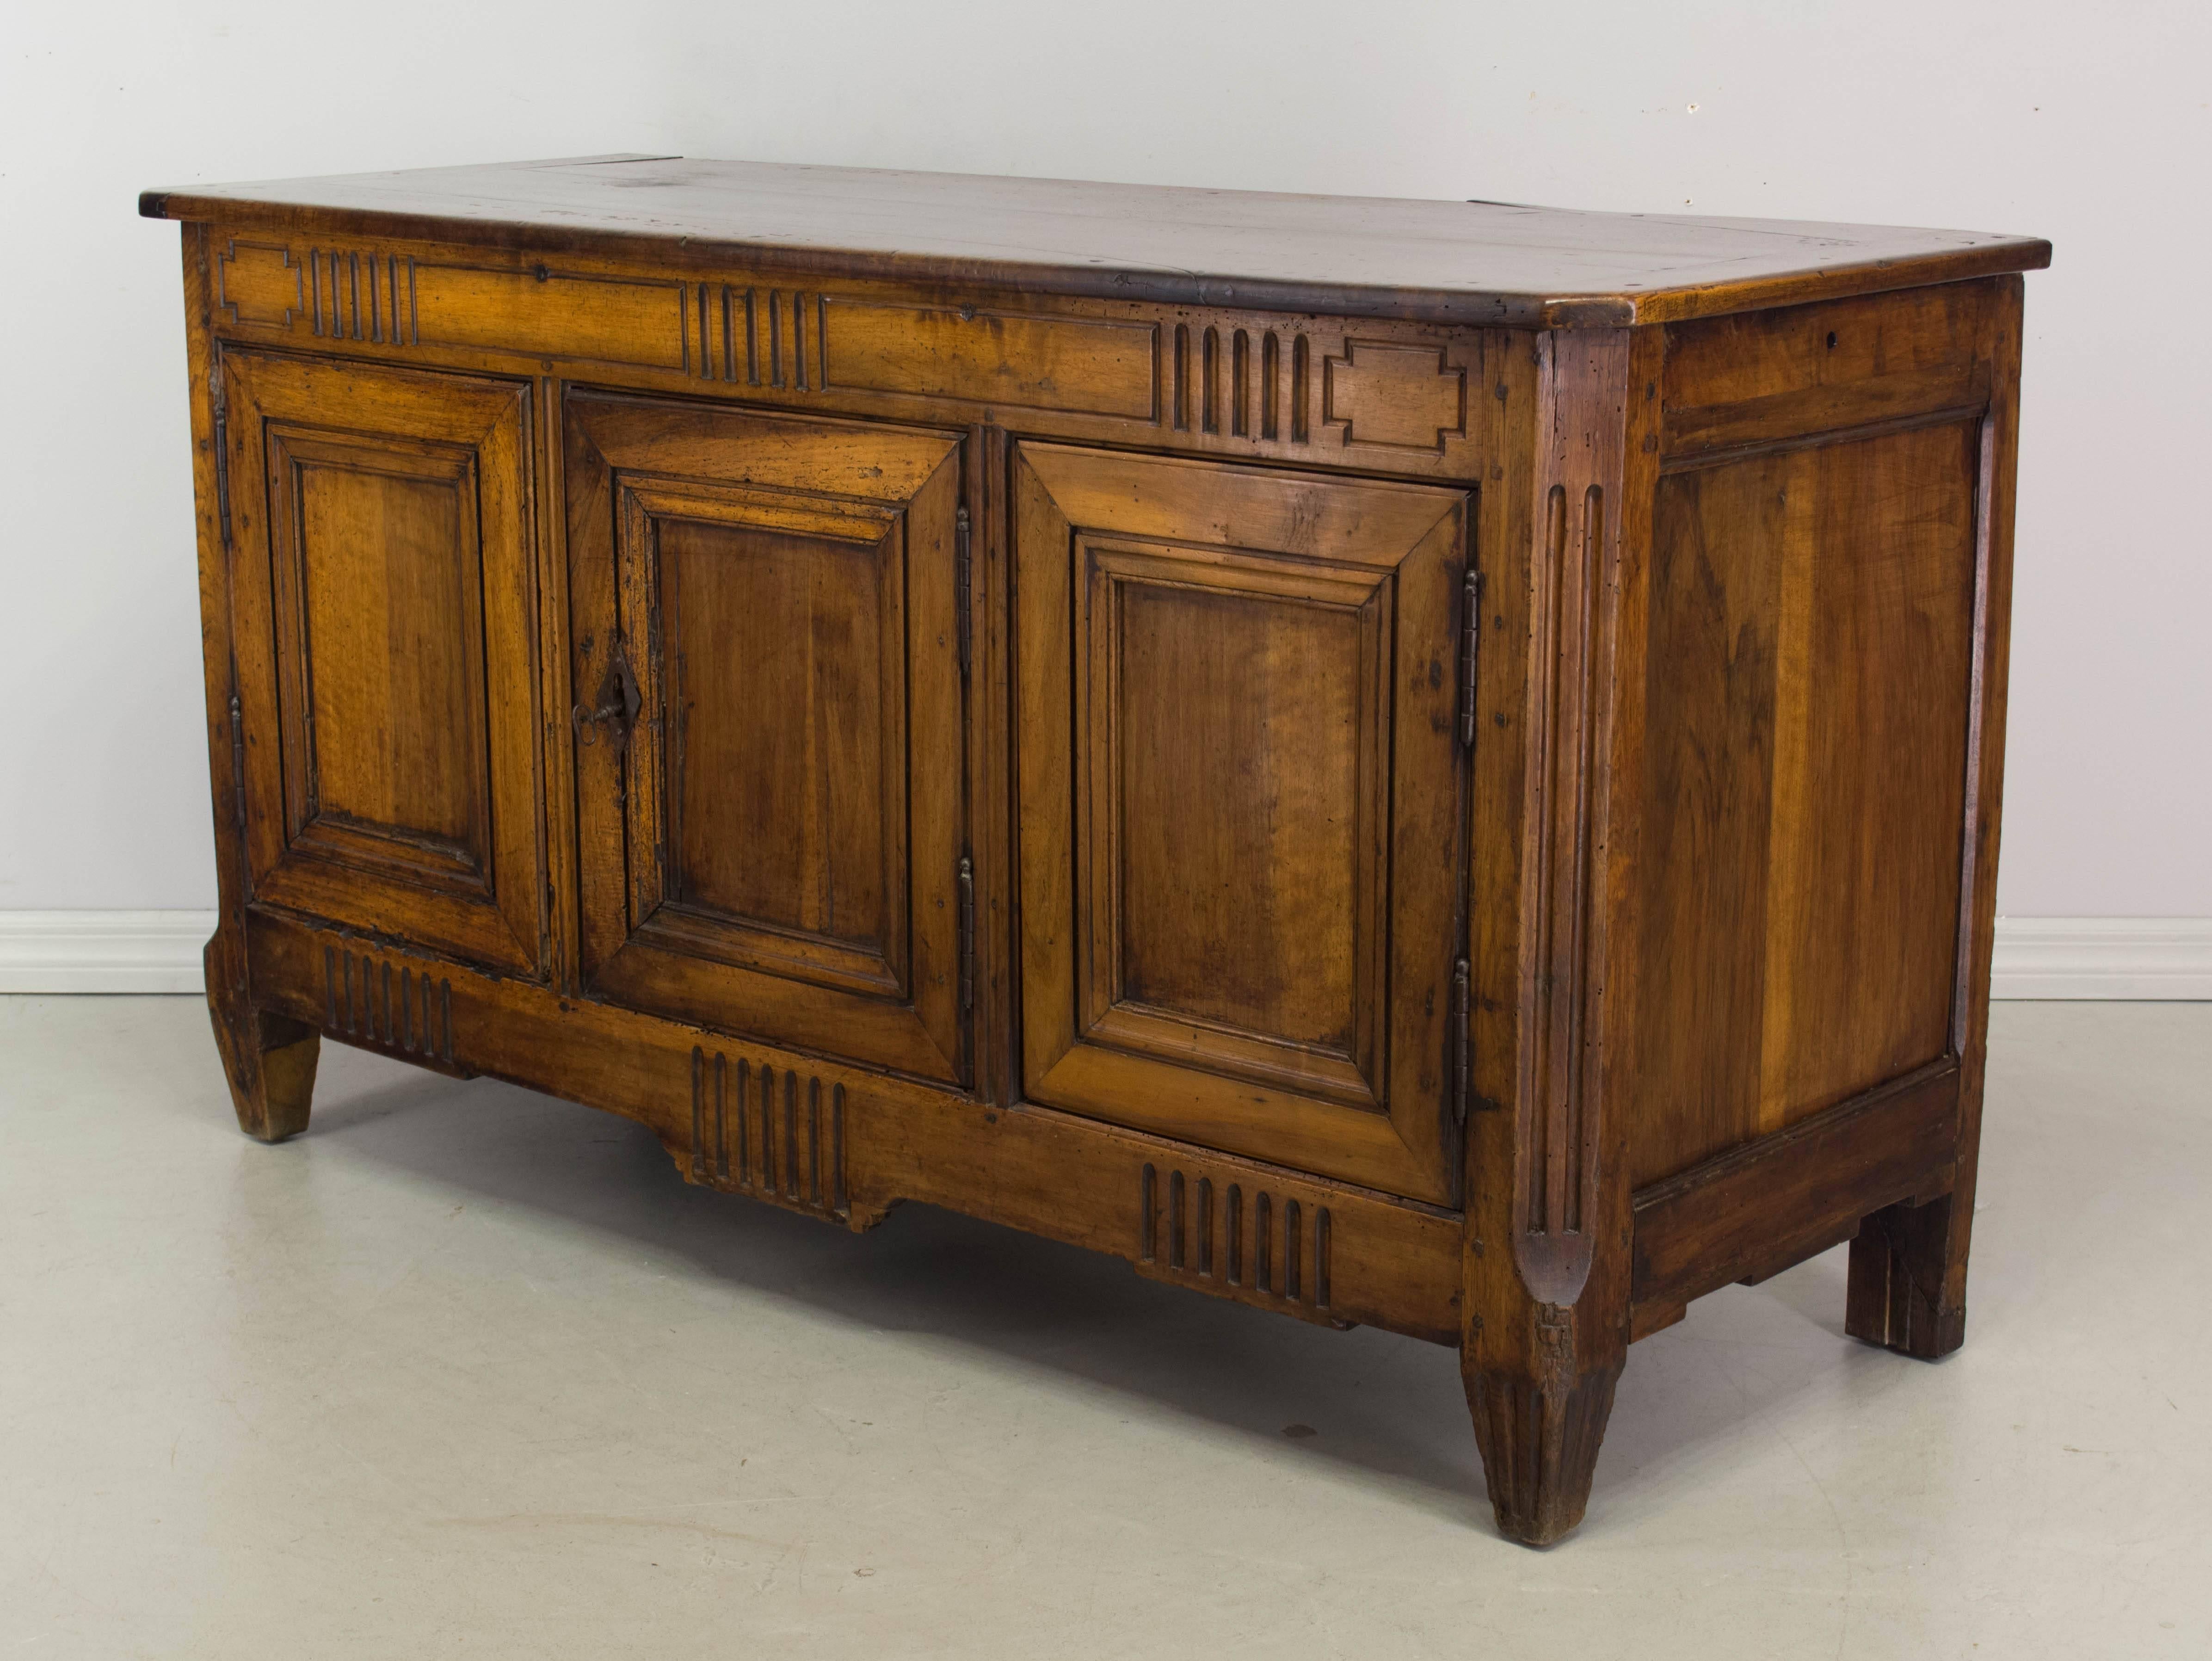 18th century Louis XVI Provençal enfilade, or sideboard, made of walnut with simple carved details. Three doors opening to one interior shelf. Lock in working order with one key. Waxed patina. Good restored condition: legs and top right corner. We